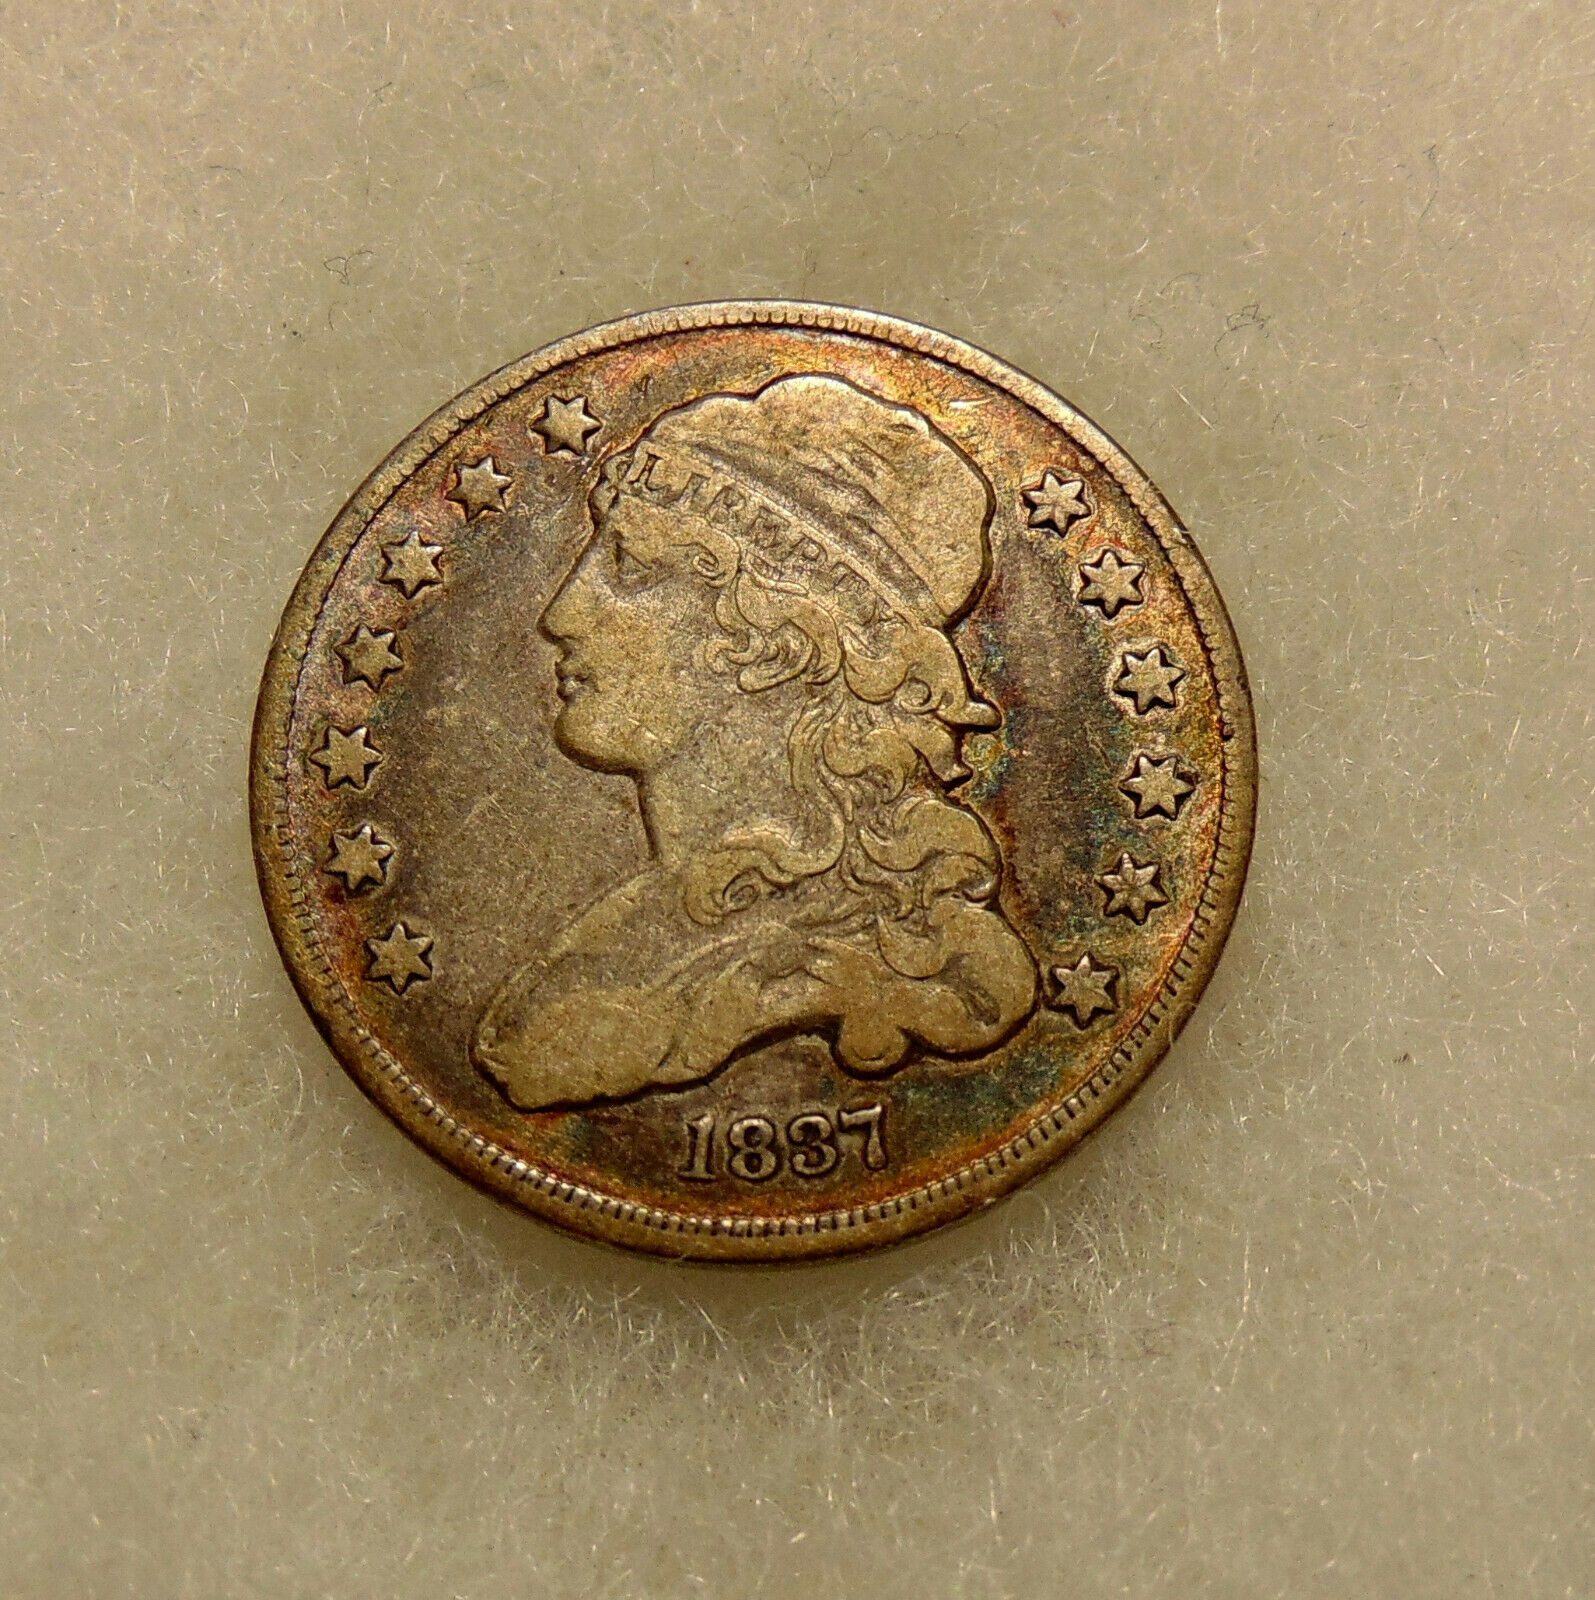 1837 Capped Bust Quarter - Sharp Looking Coin - Free Shipping